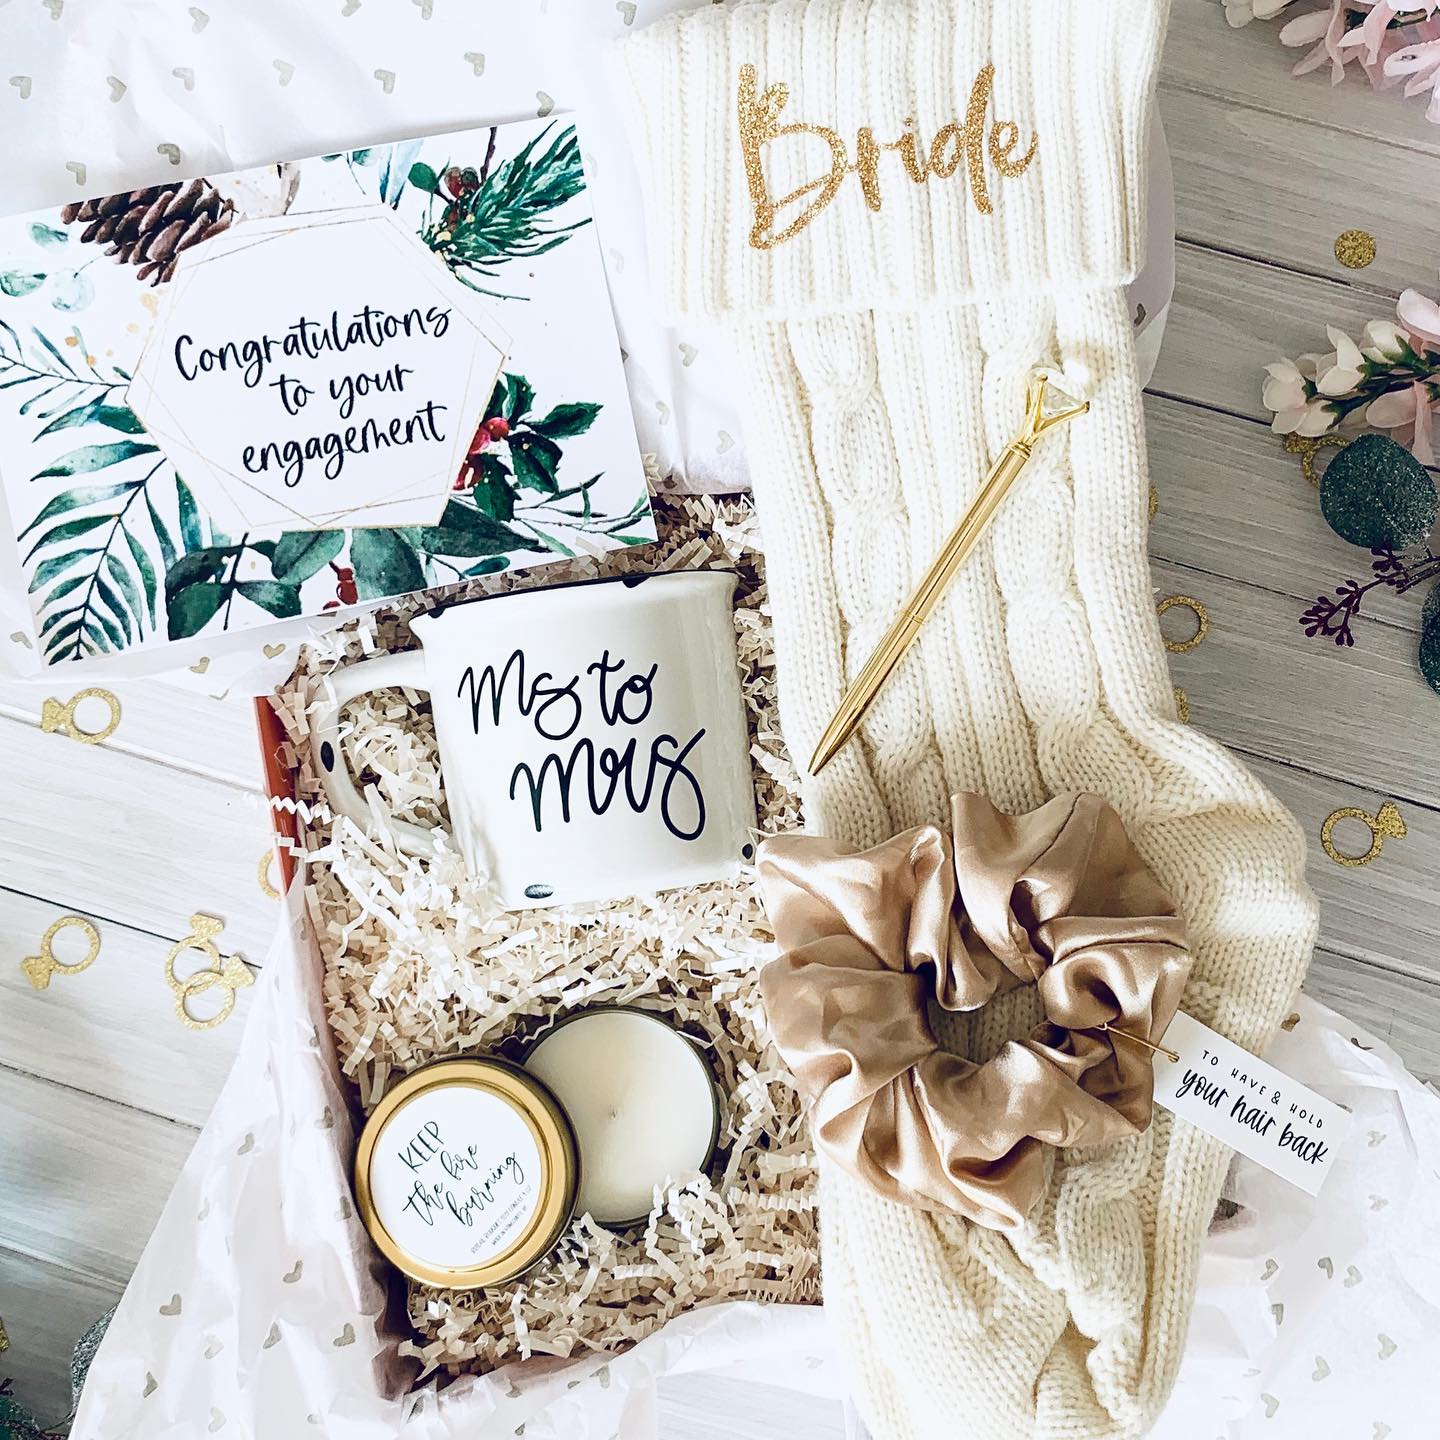 15 Ultra Chic Bridesmaid Proposal Gifts to Show Your Love in Style |  Bridesmaid proposal gifts, Wedding gifts for bridesmaids, Bridesmaid  proposal box